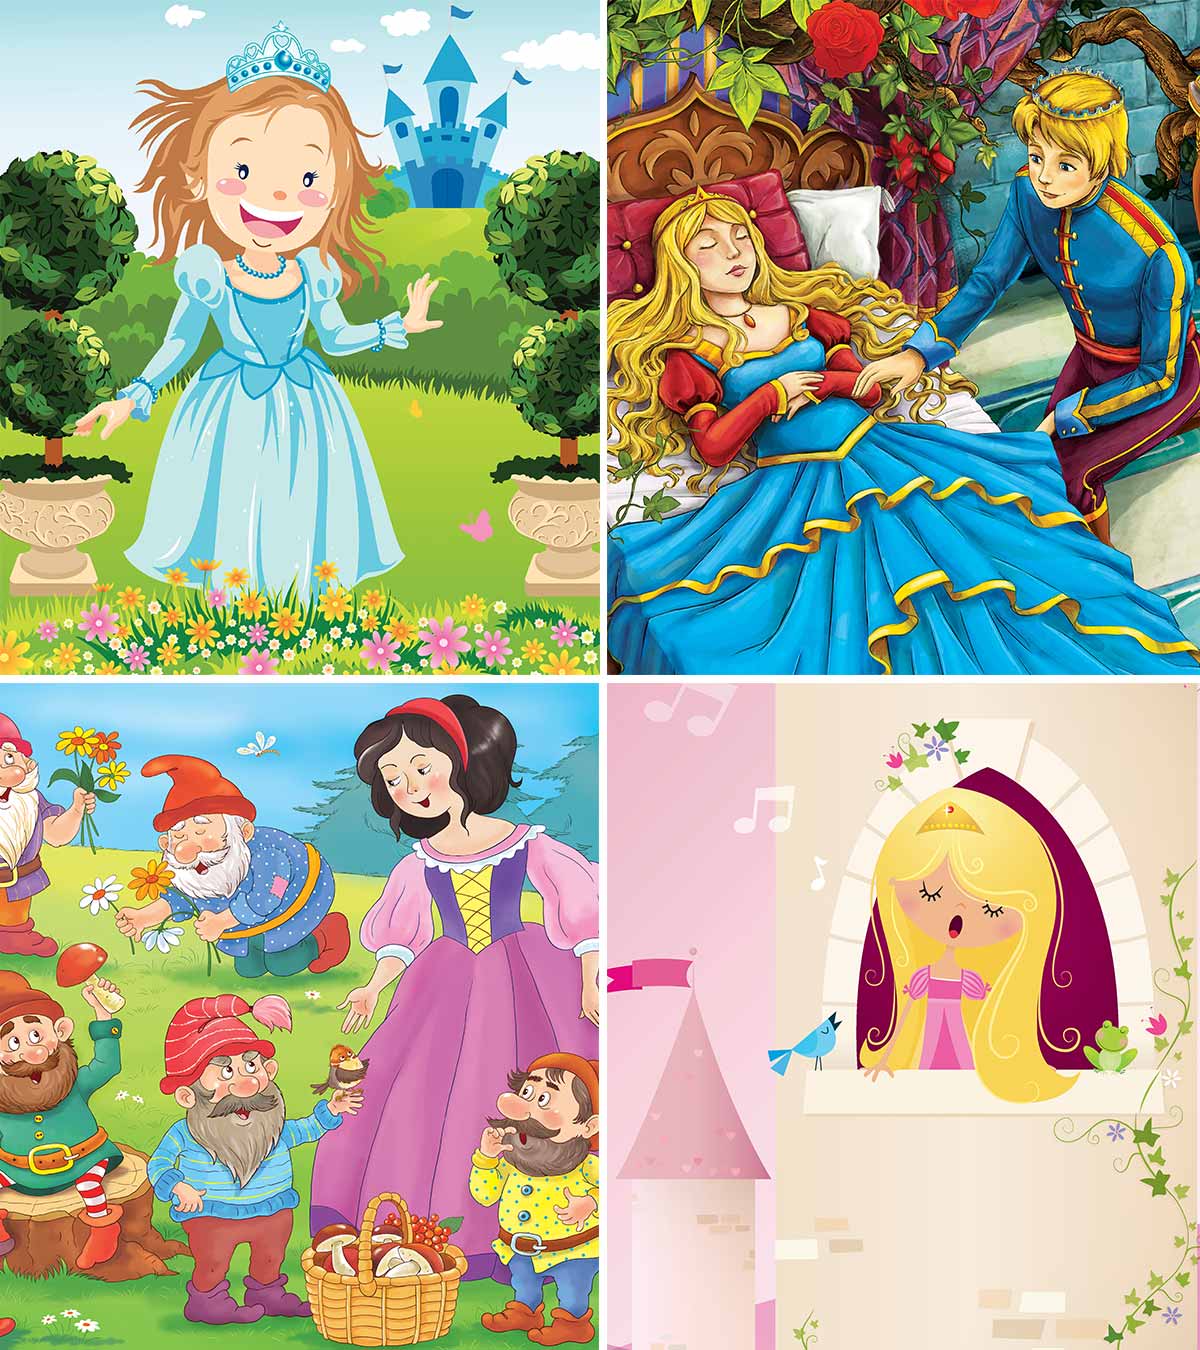 11 Beautiful Princess Stories For Kids To Read